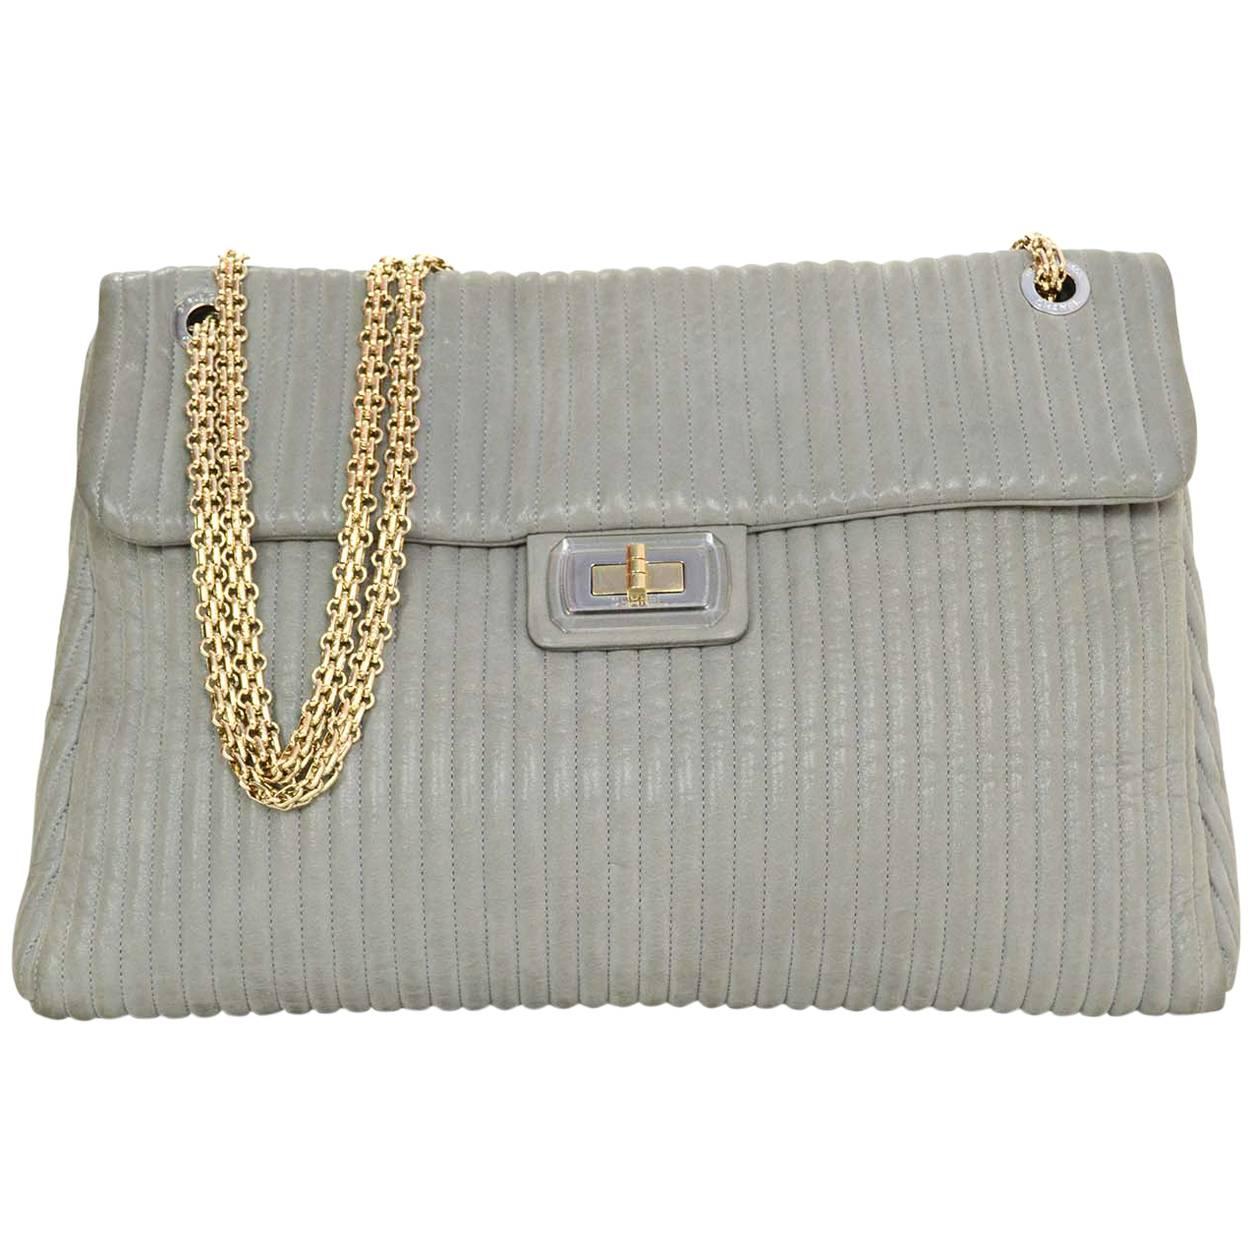 Chanel Reissue Grey Iridescent Quilted Leather Flap Bag GHW